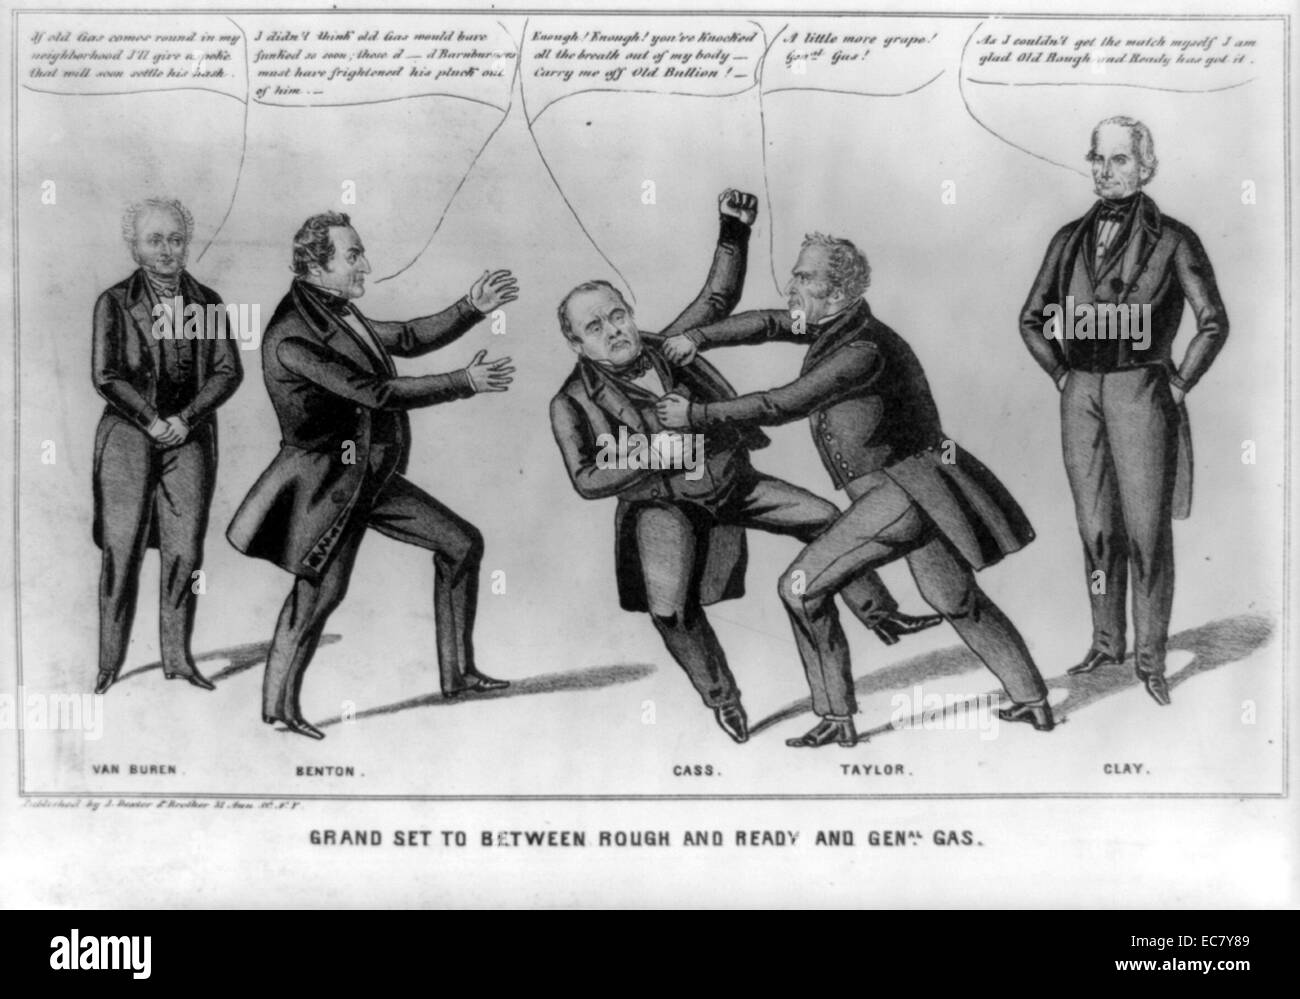 Grand set to between rough and ready and Genal. Gas' 'Zachary Taylor and Lewis Cass engage in a bout of fisticuffs in their battle for the presidency in 1848. Taylor, clearly getting the better of his opponent, seizes Cass by the lapels. His appeal for help is to conservative Democratic senator Thomas Hart Benton. Stock Photo